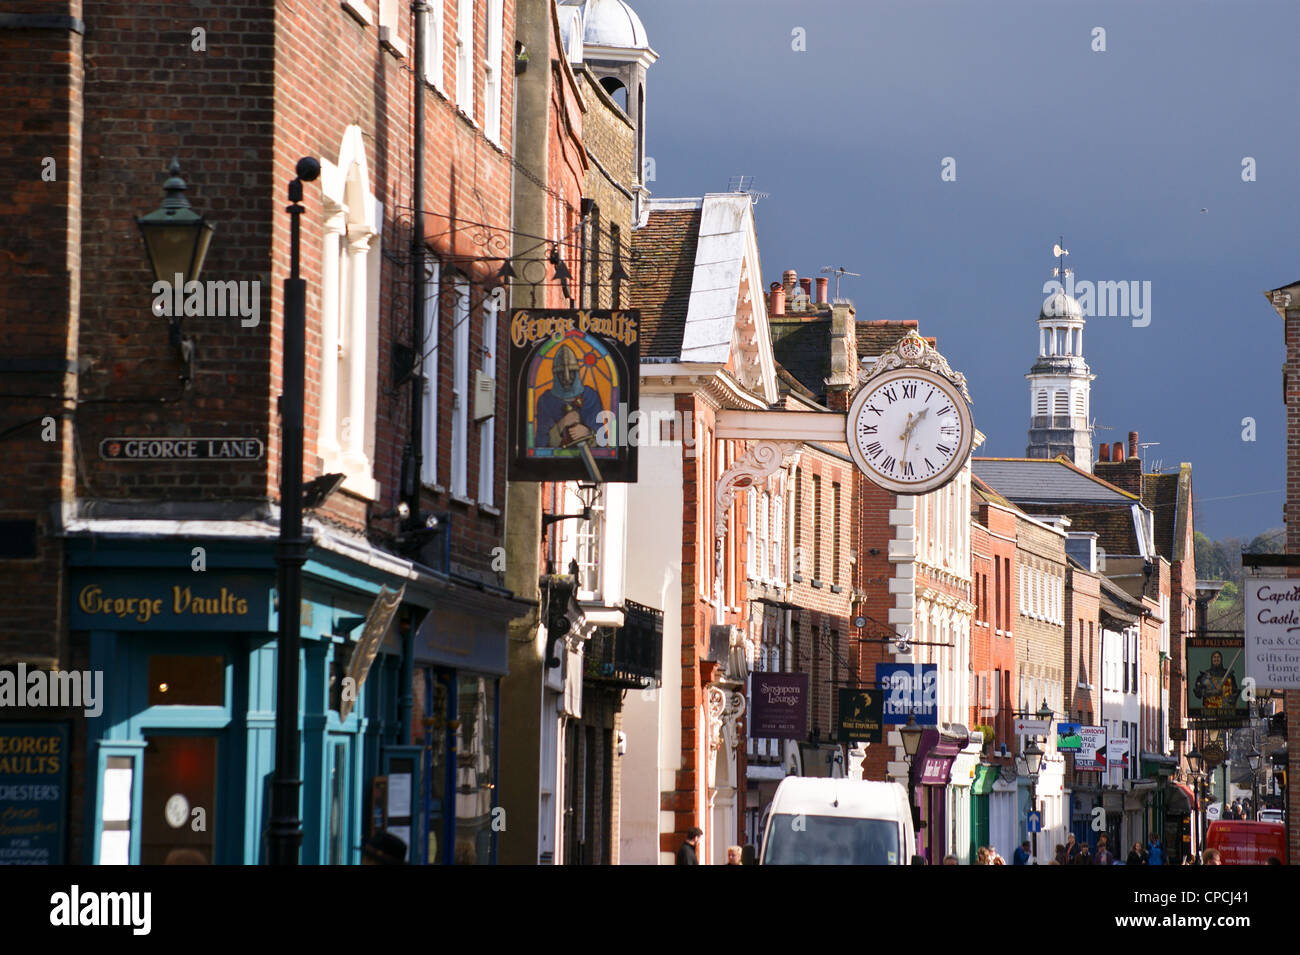 Shop fronts in Eastgate,Rochester, Kent, England Stock Photo